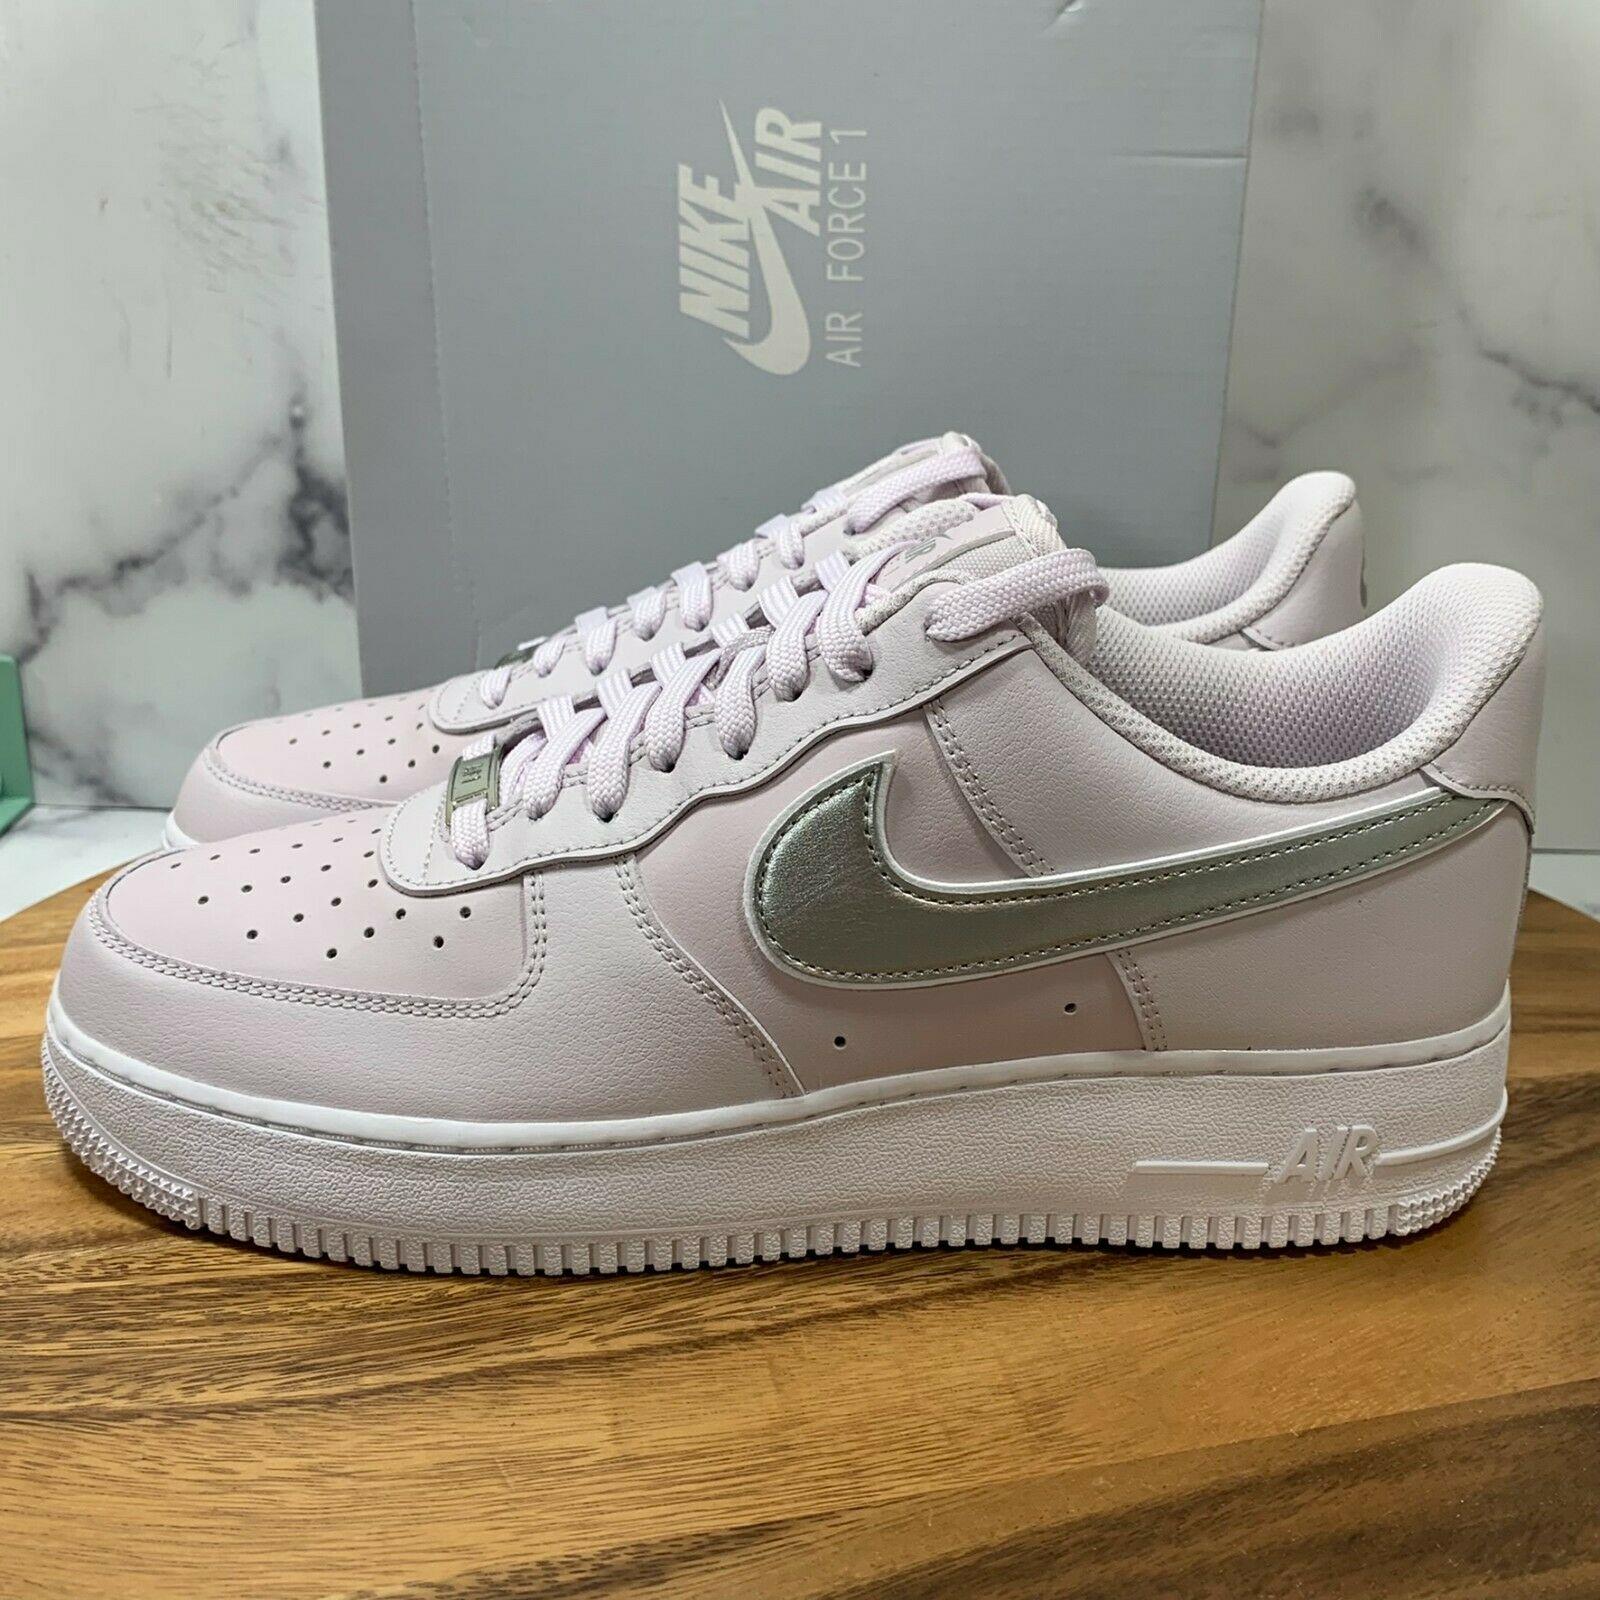 Nike Womens Air Force 1 07 Essential Lilac Silver Sneaker Shoes Size US 11